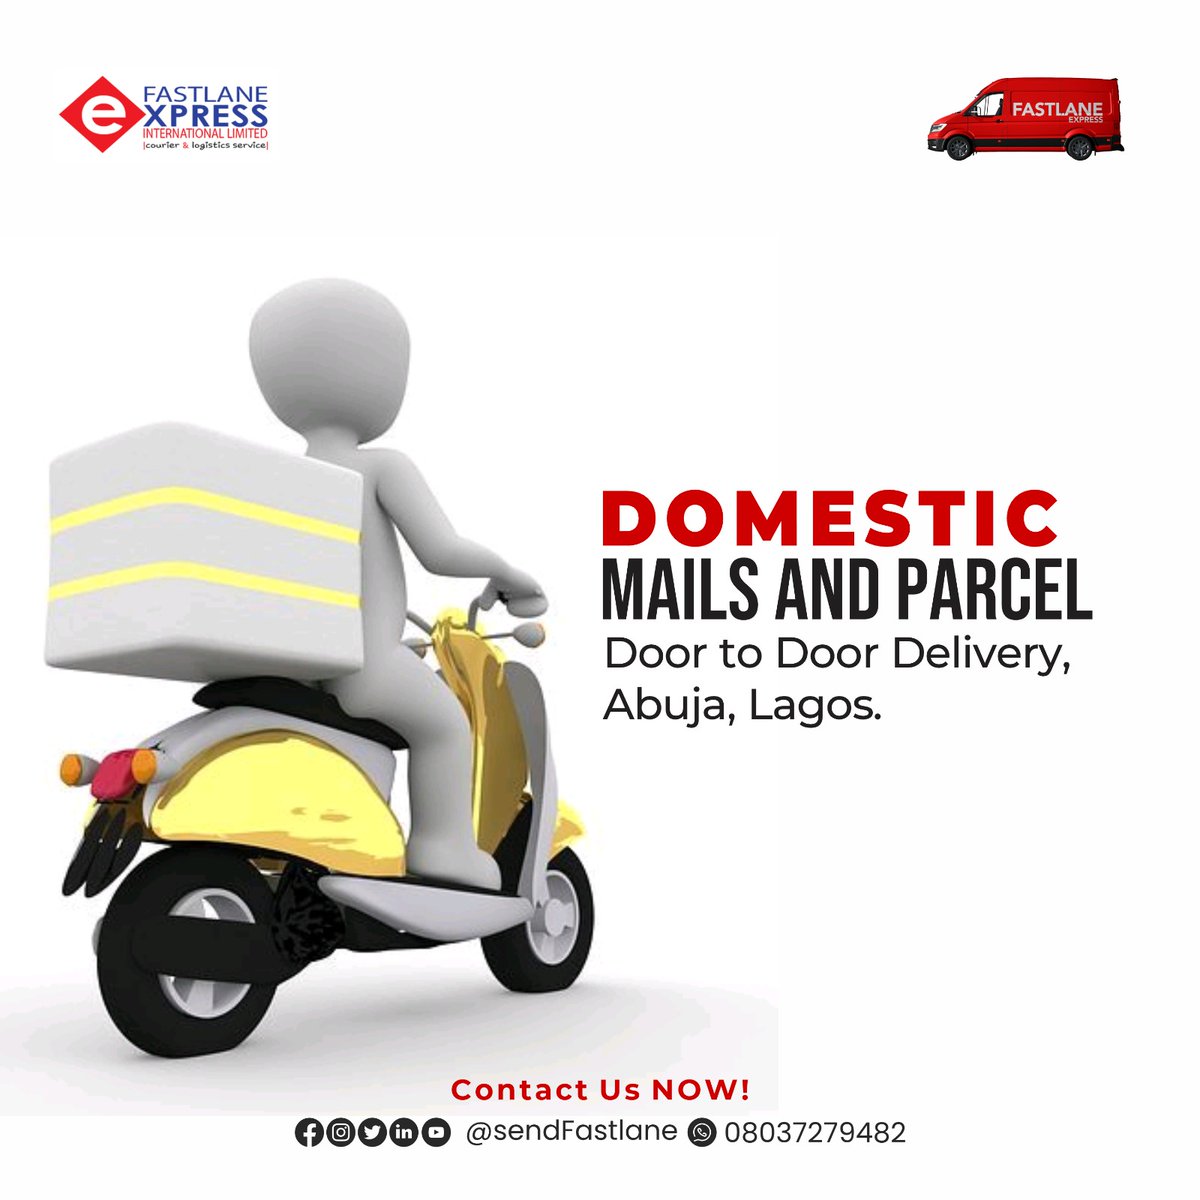 Trust us to keep your logistics seamless. With dedication and efficiency, we're ready to navigate the month ahead. 

#sendfastlane #fastlane #abujalogistics #expressdelivery #abujabusiness #OnTimeEveryTime #LogisticsMasters